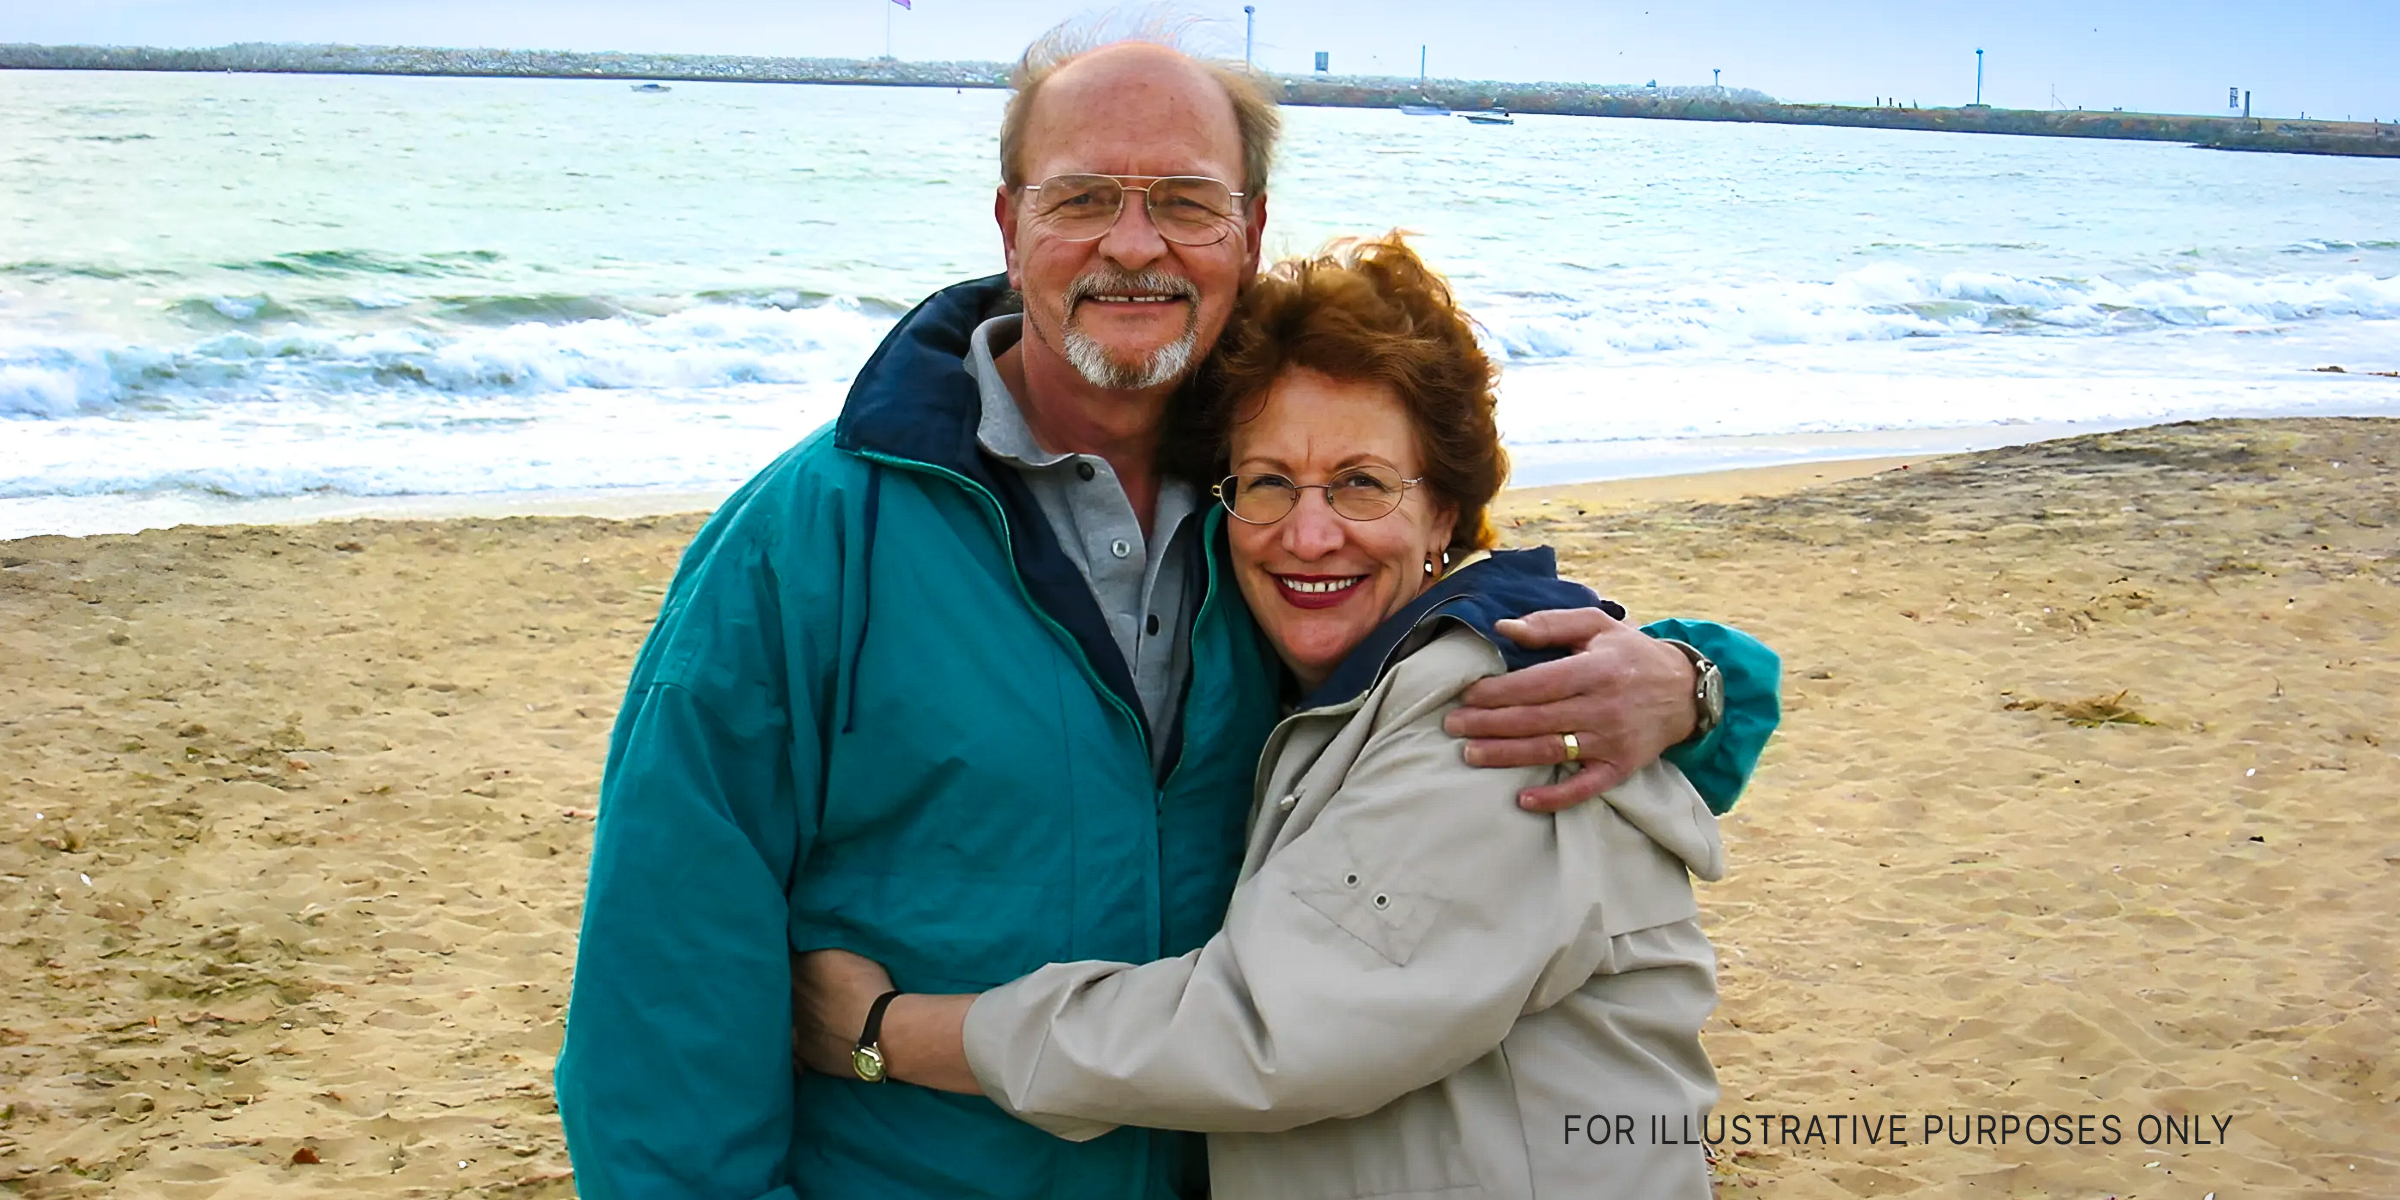 A middle-aged couple hugging on the beach | Source: flickr.com/michaelarrington/CC BY 2.0